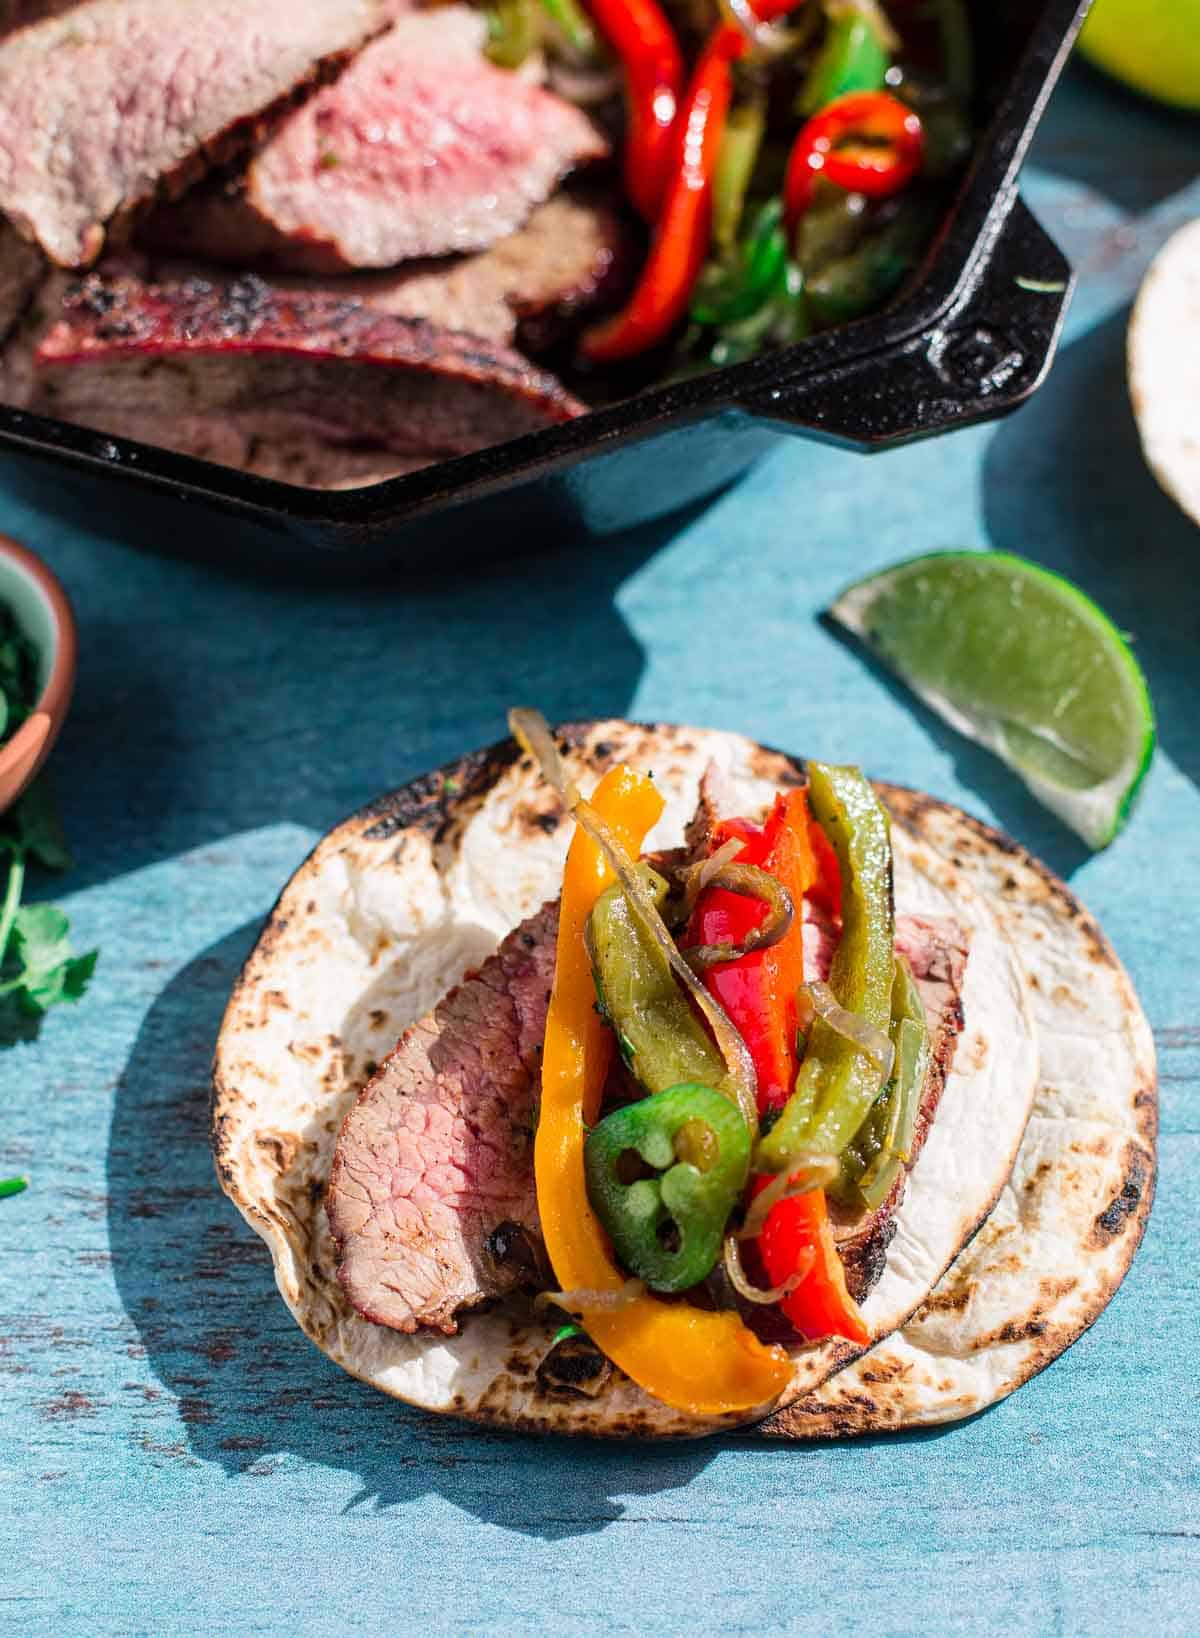 Tri Tip fajitas with sides and toppings on a wearing board.